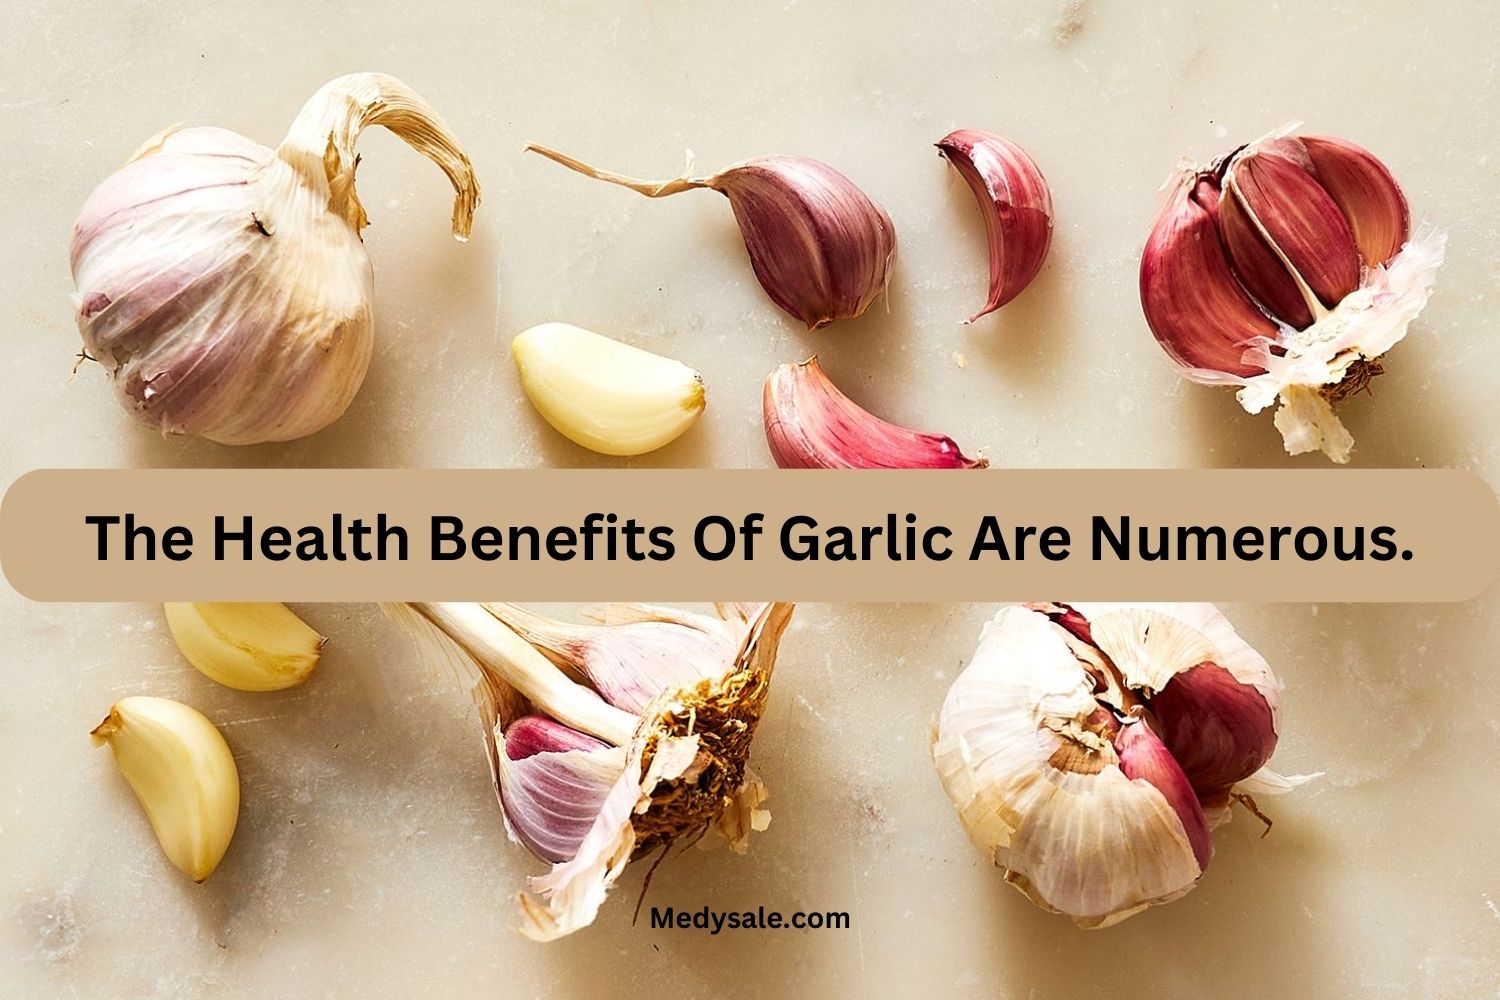 The Health Benefits Of Garlic Are Numerous.